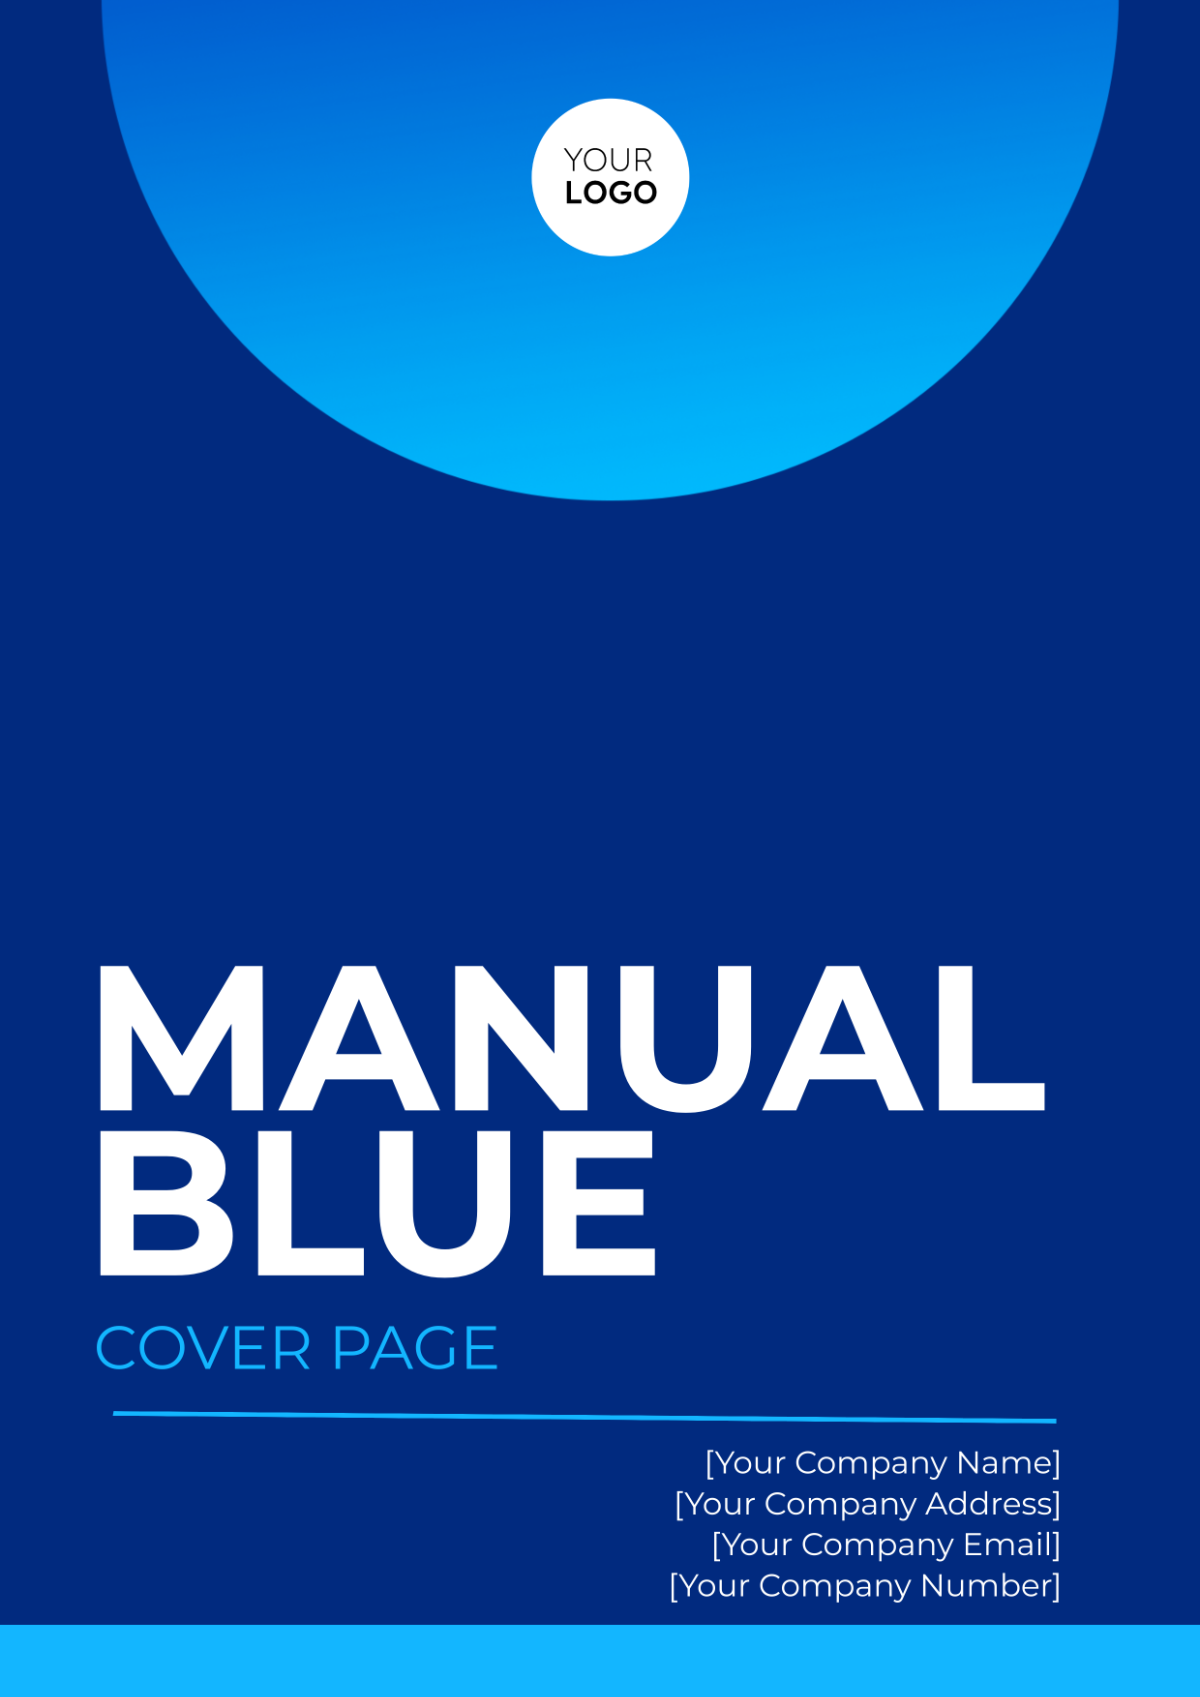 Manual Blue Cover Page